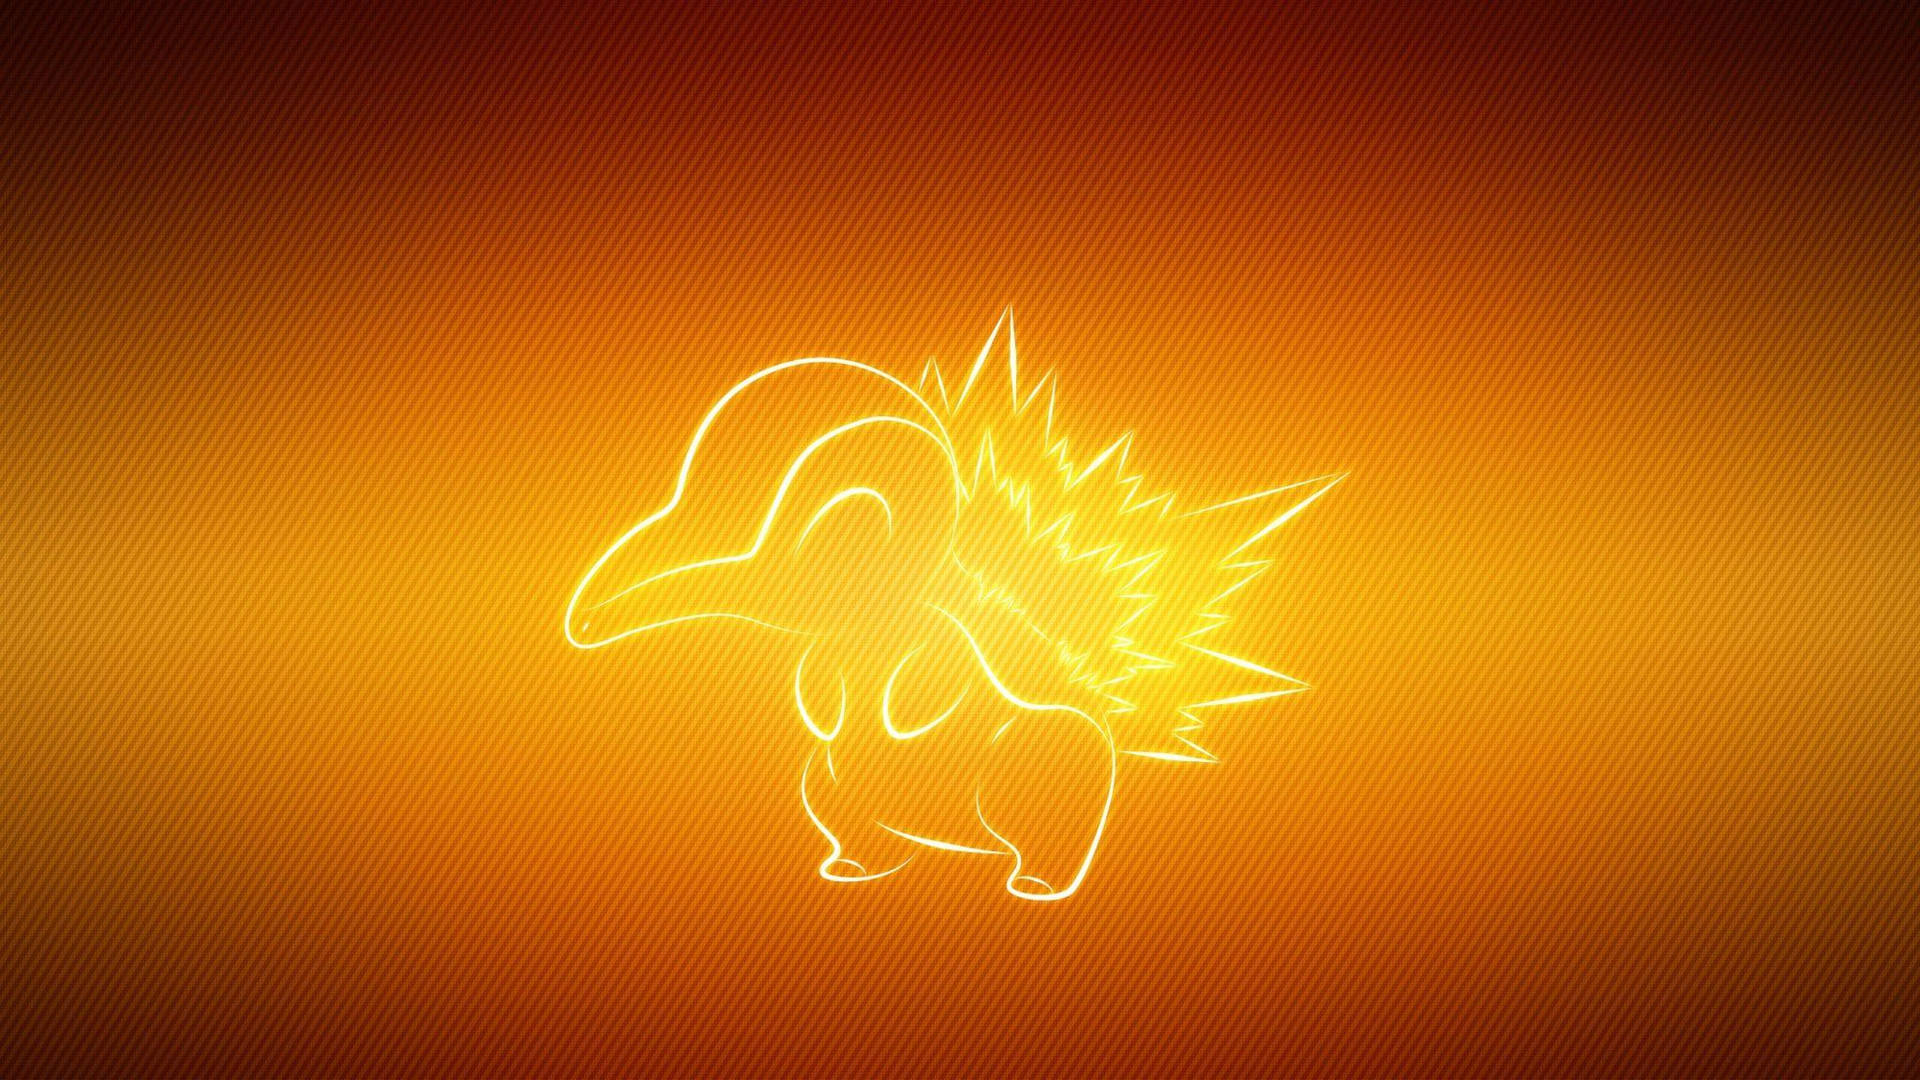 Cyndaquil Outline Wallpaper